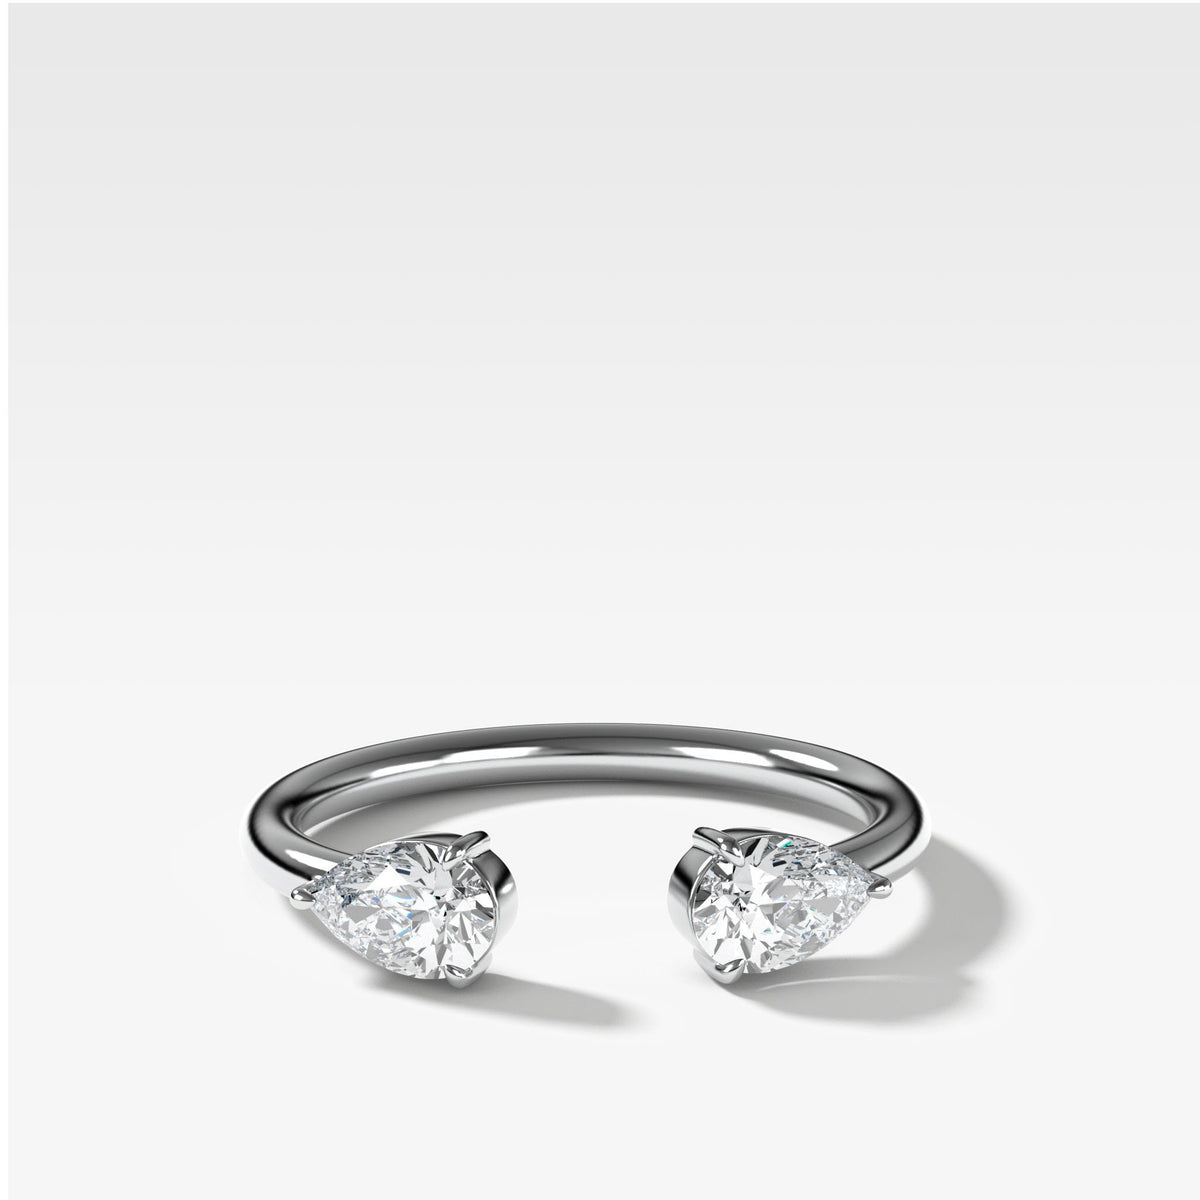 Twin Pear Diamond Finger Cuff by Good Stone in White Gold